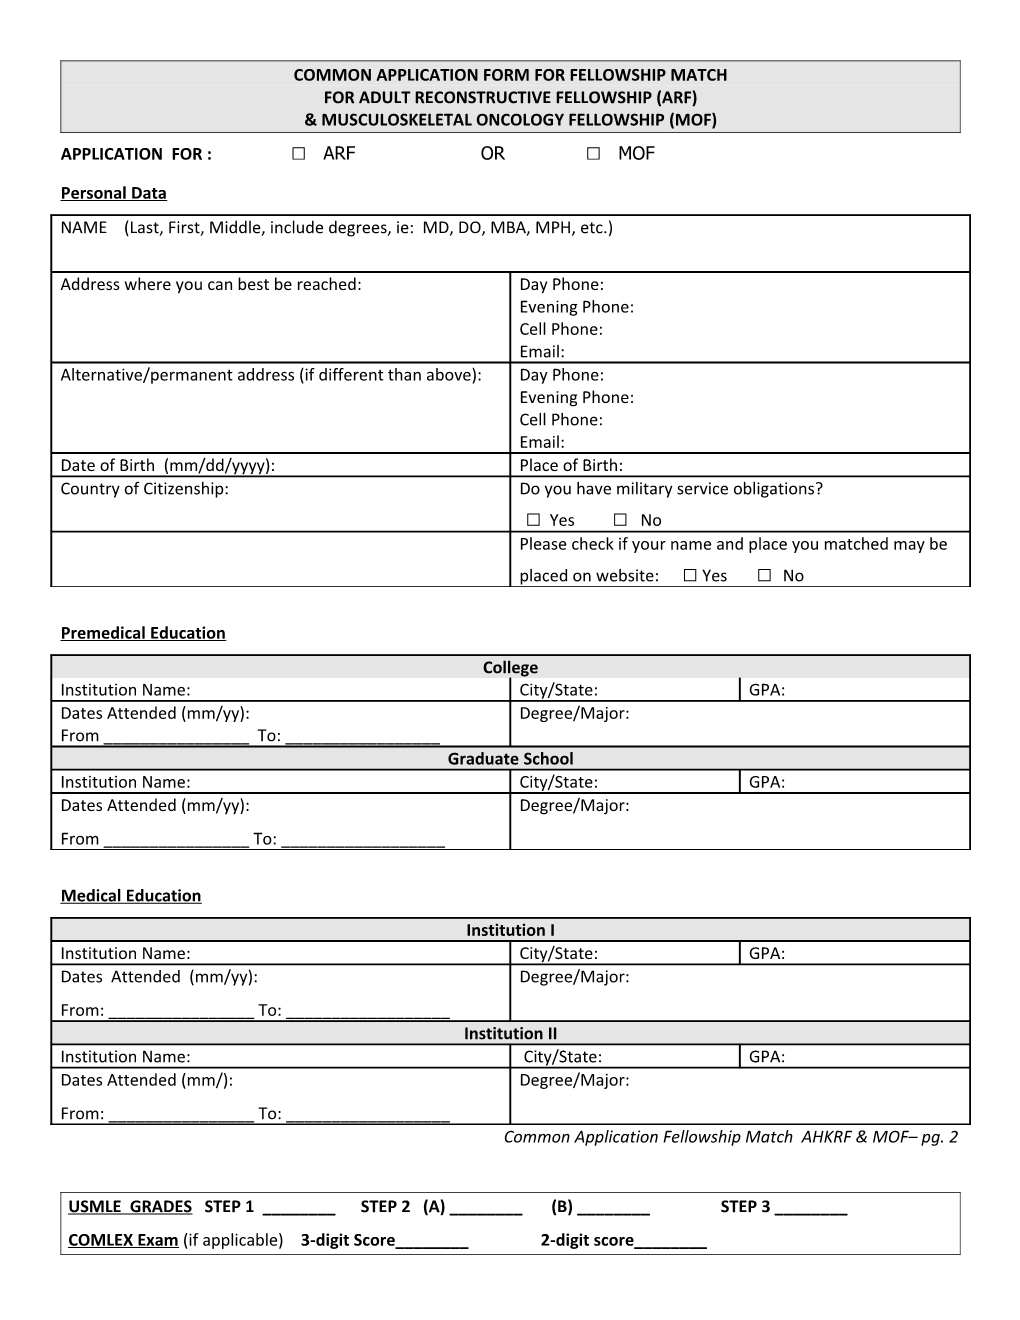 Common Application Form for Fellowship Match